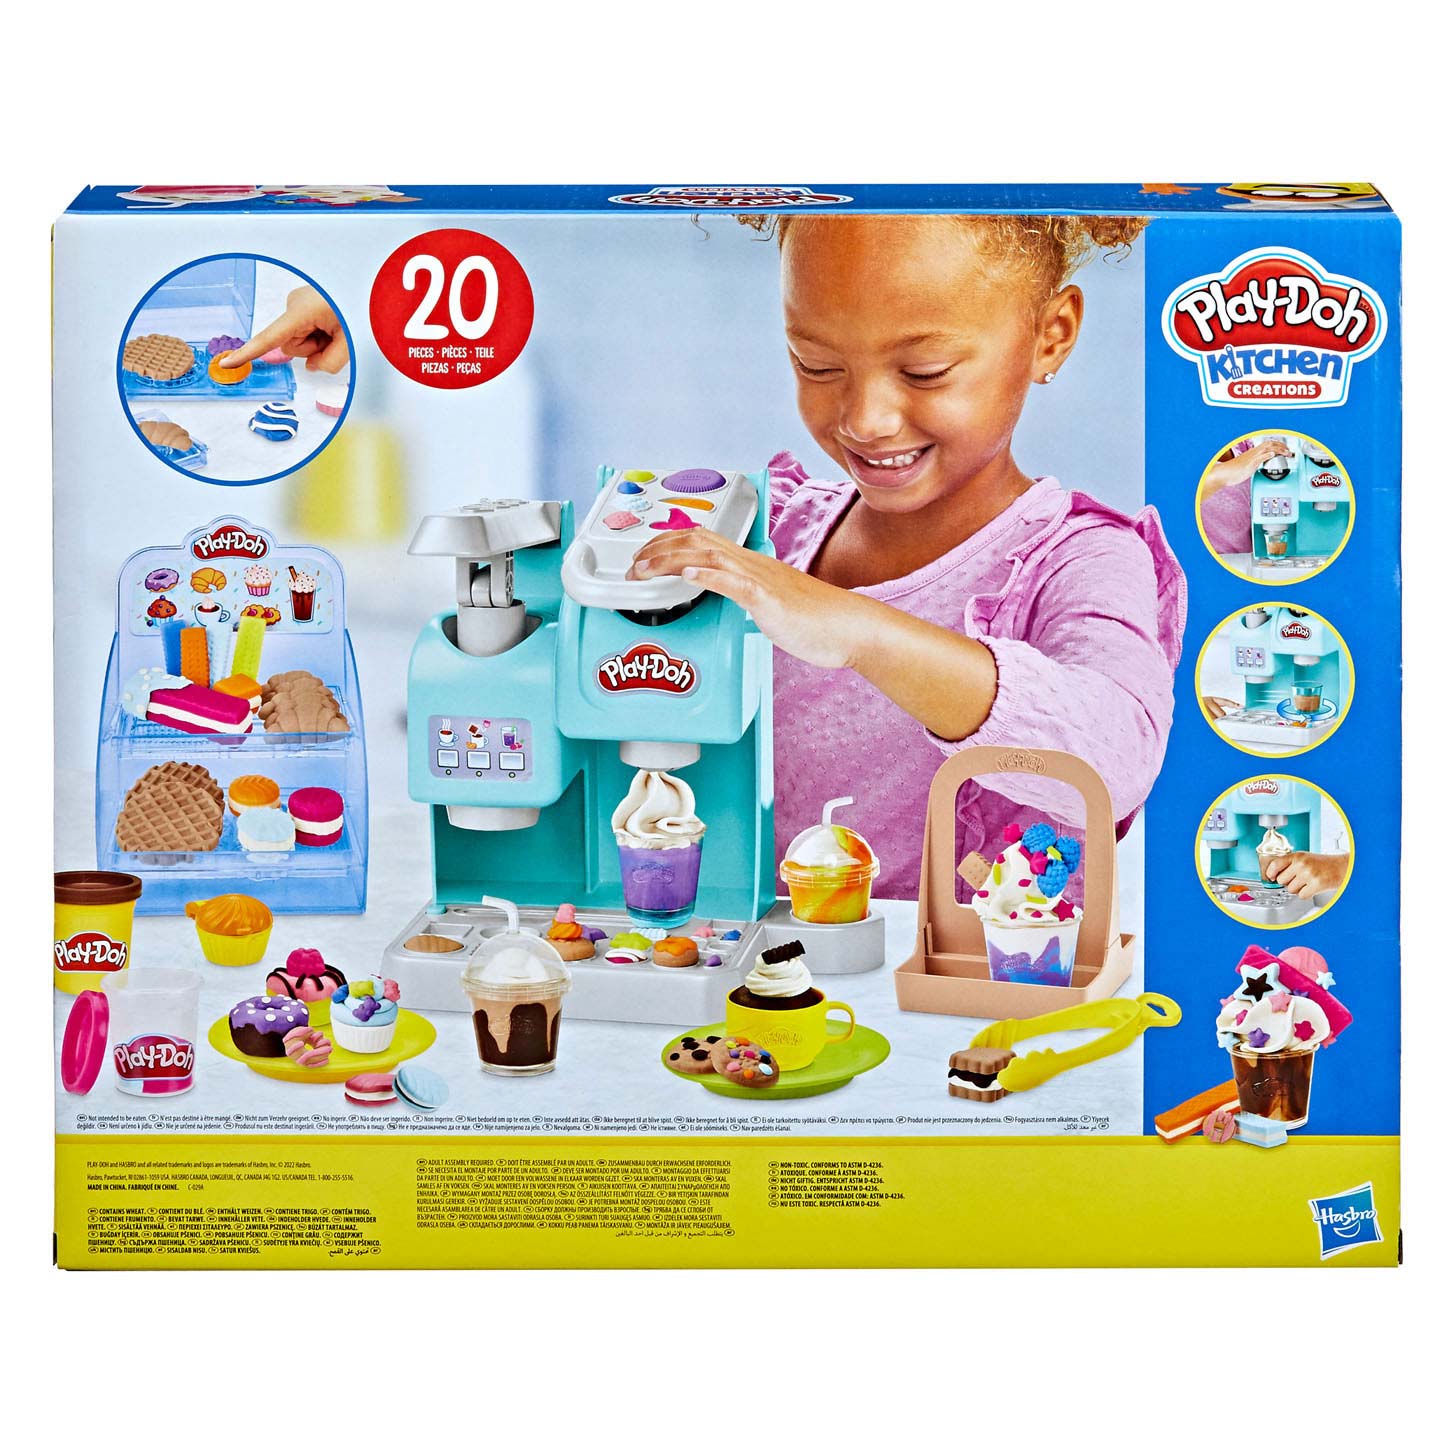 Play-Doh Super Colorful Cafe Speelset